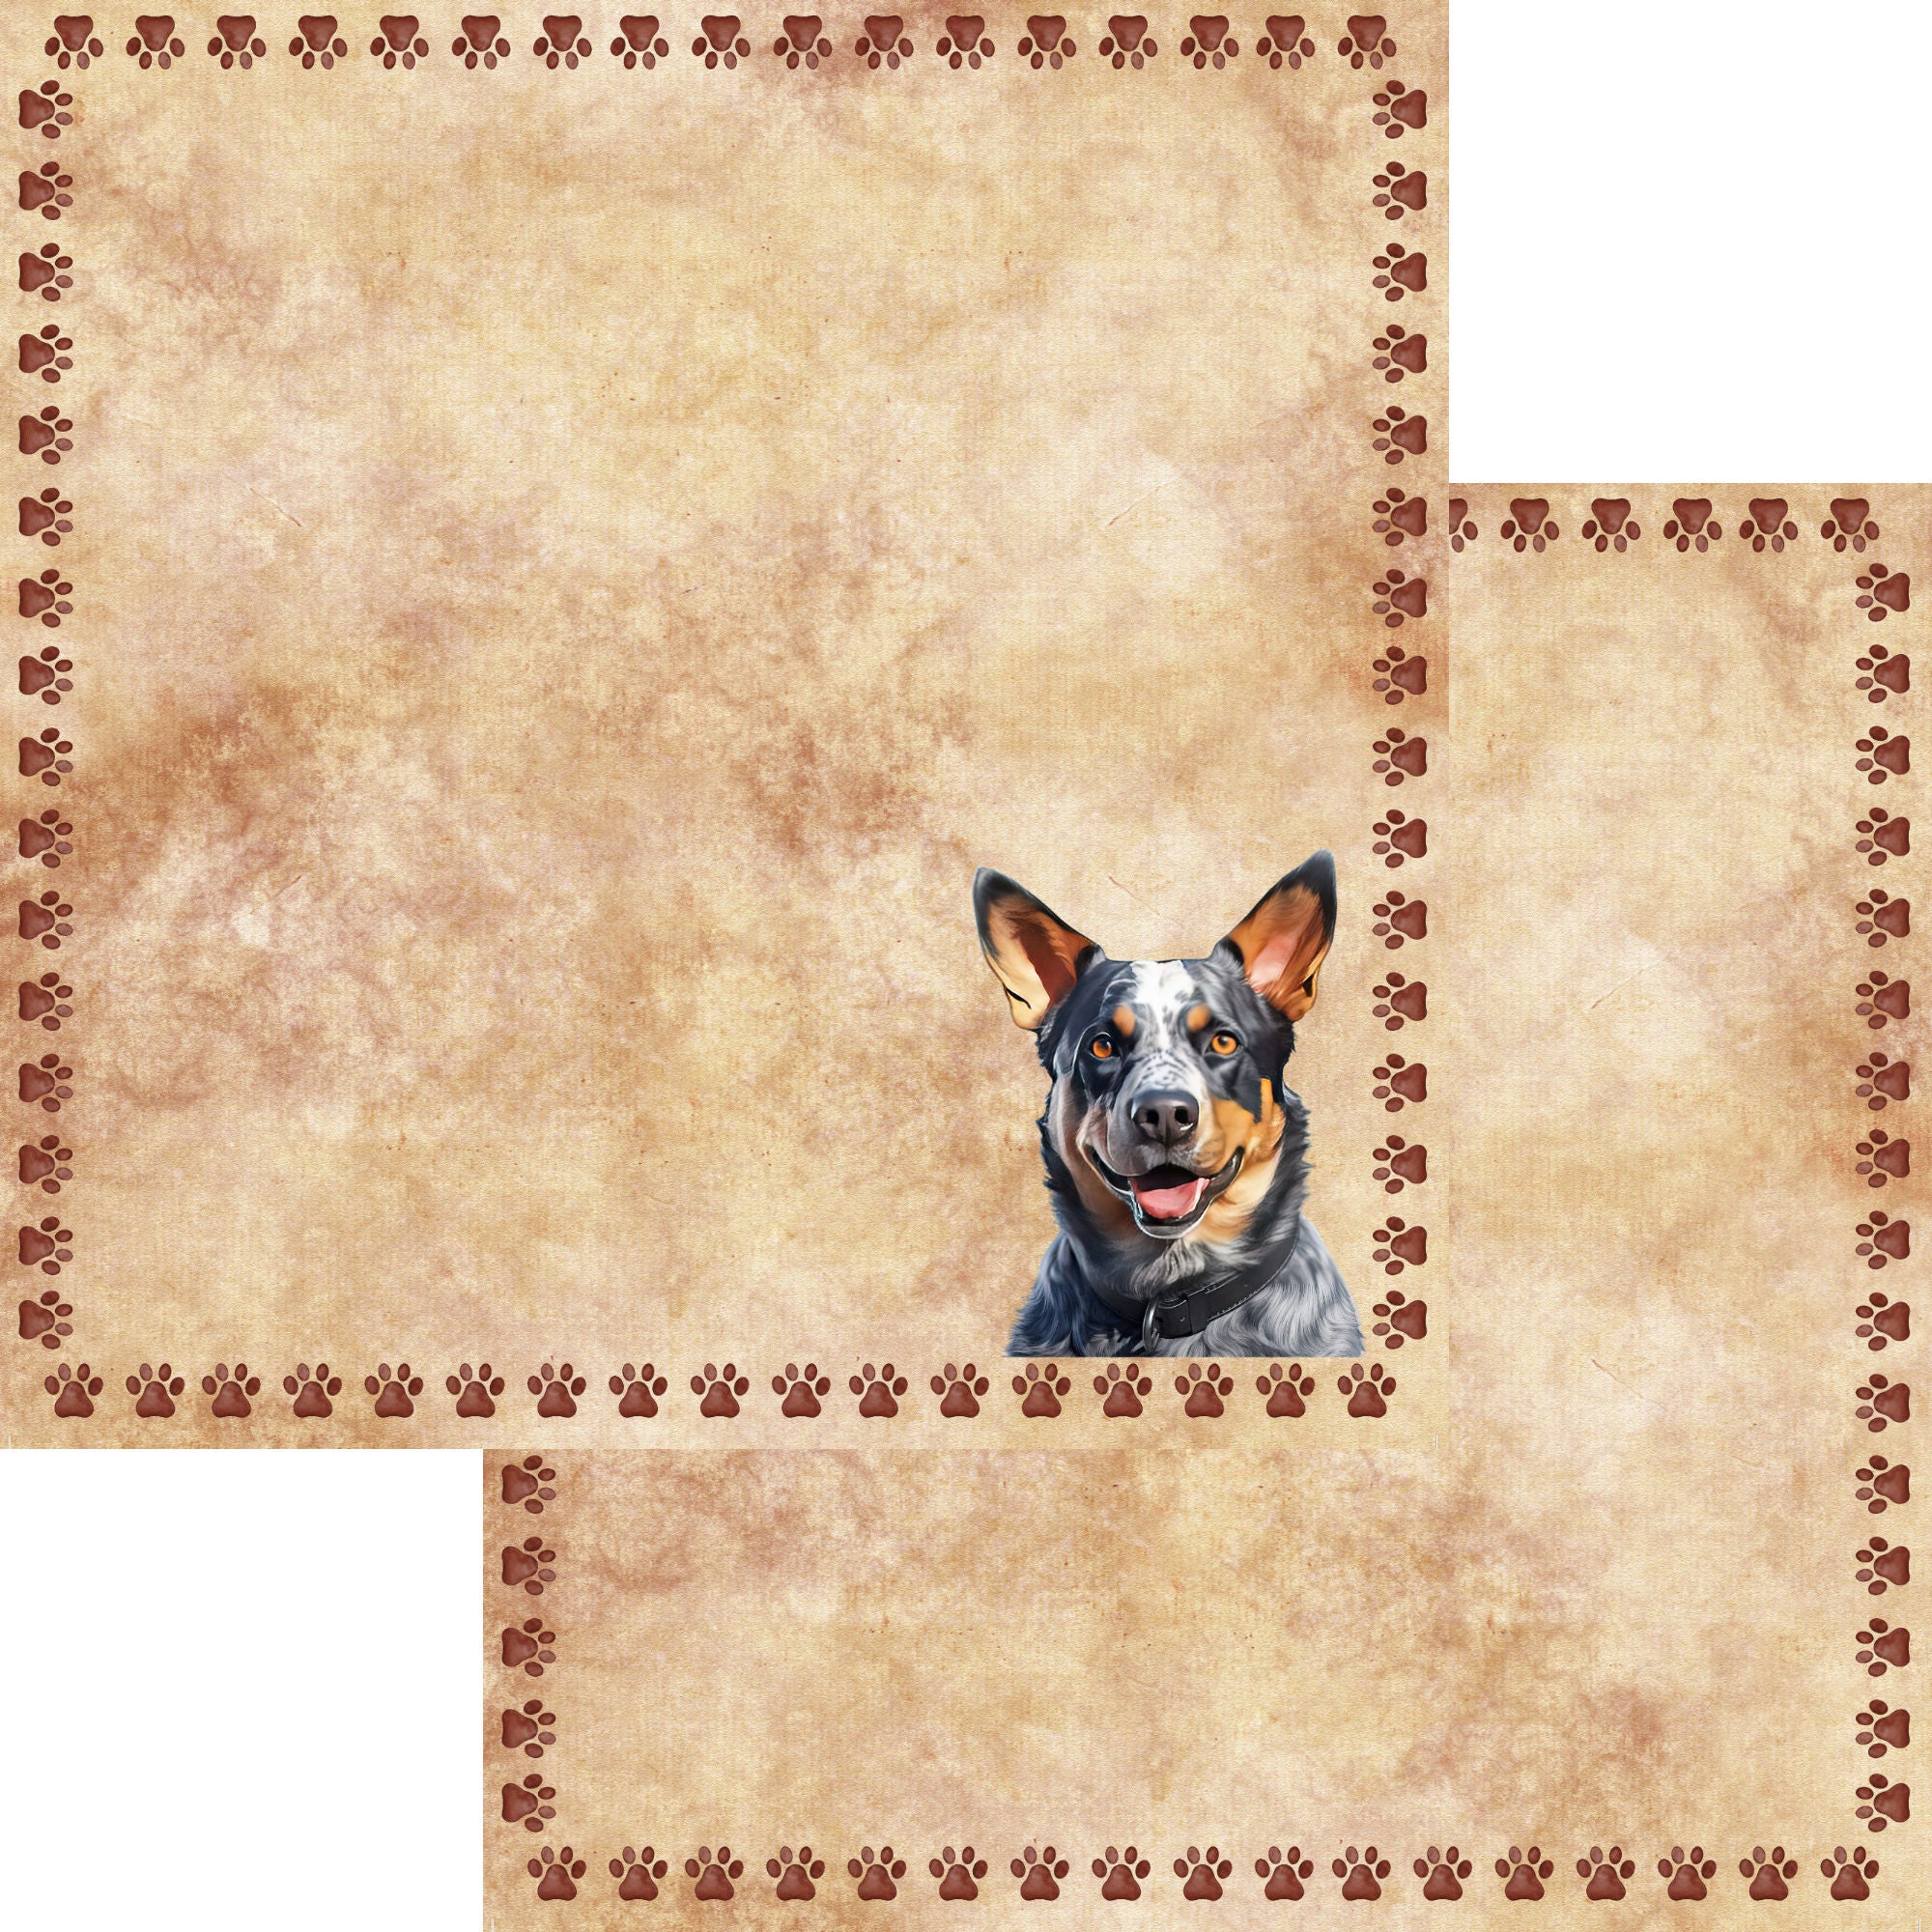 Dog Breeds Collection Australian Cattle Dog 12 x 12 Double-Sided Scrapbook Paper by SSC Designs